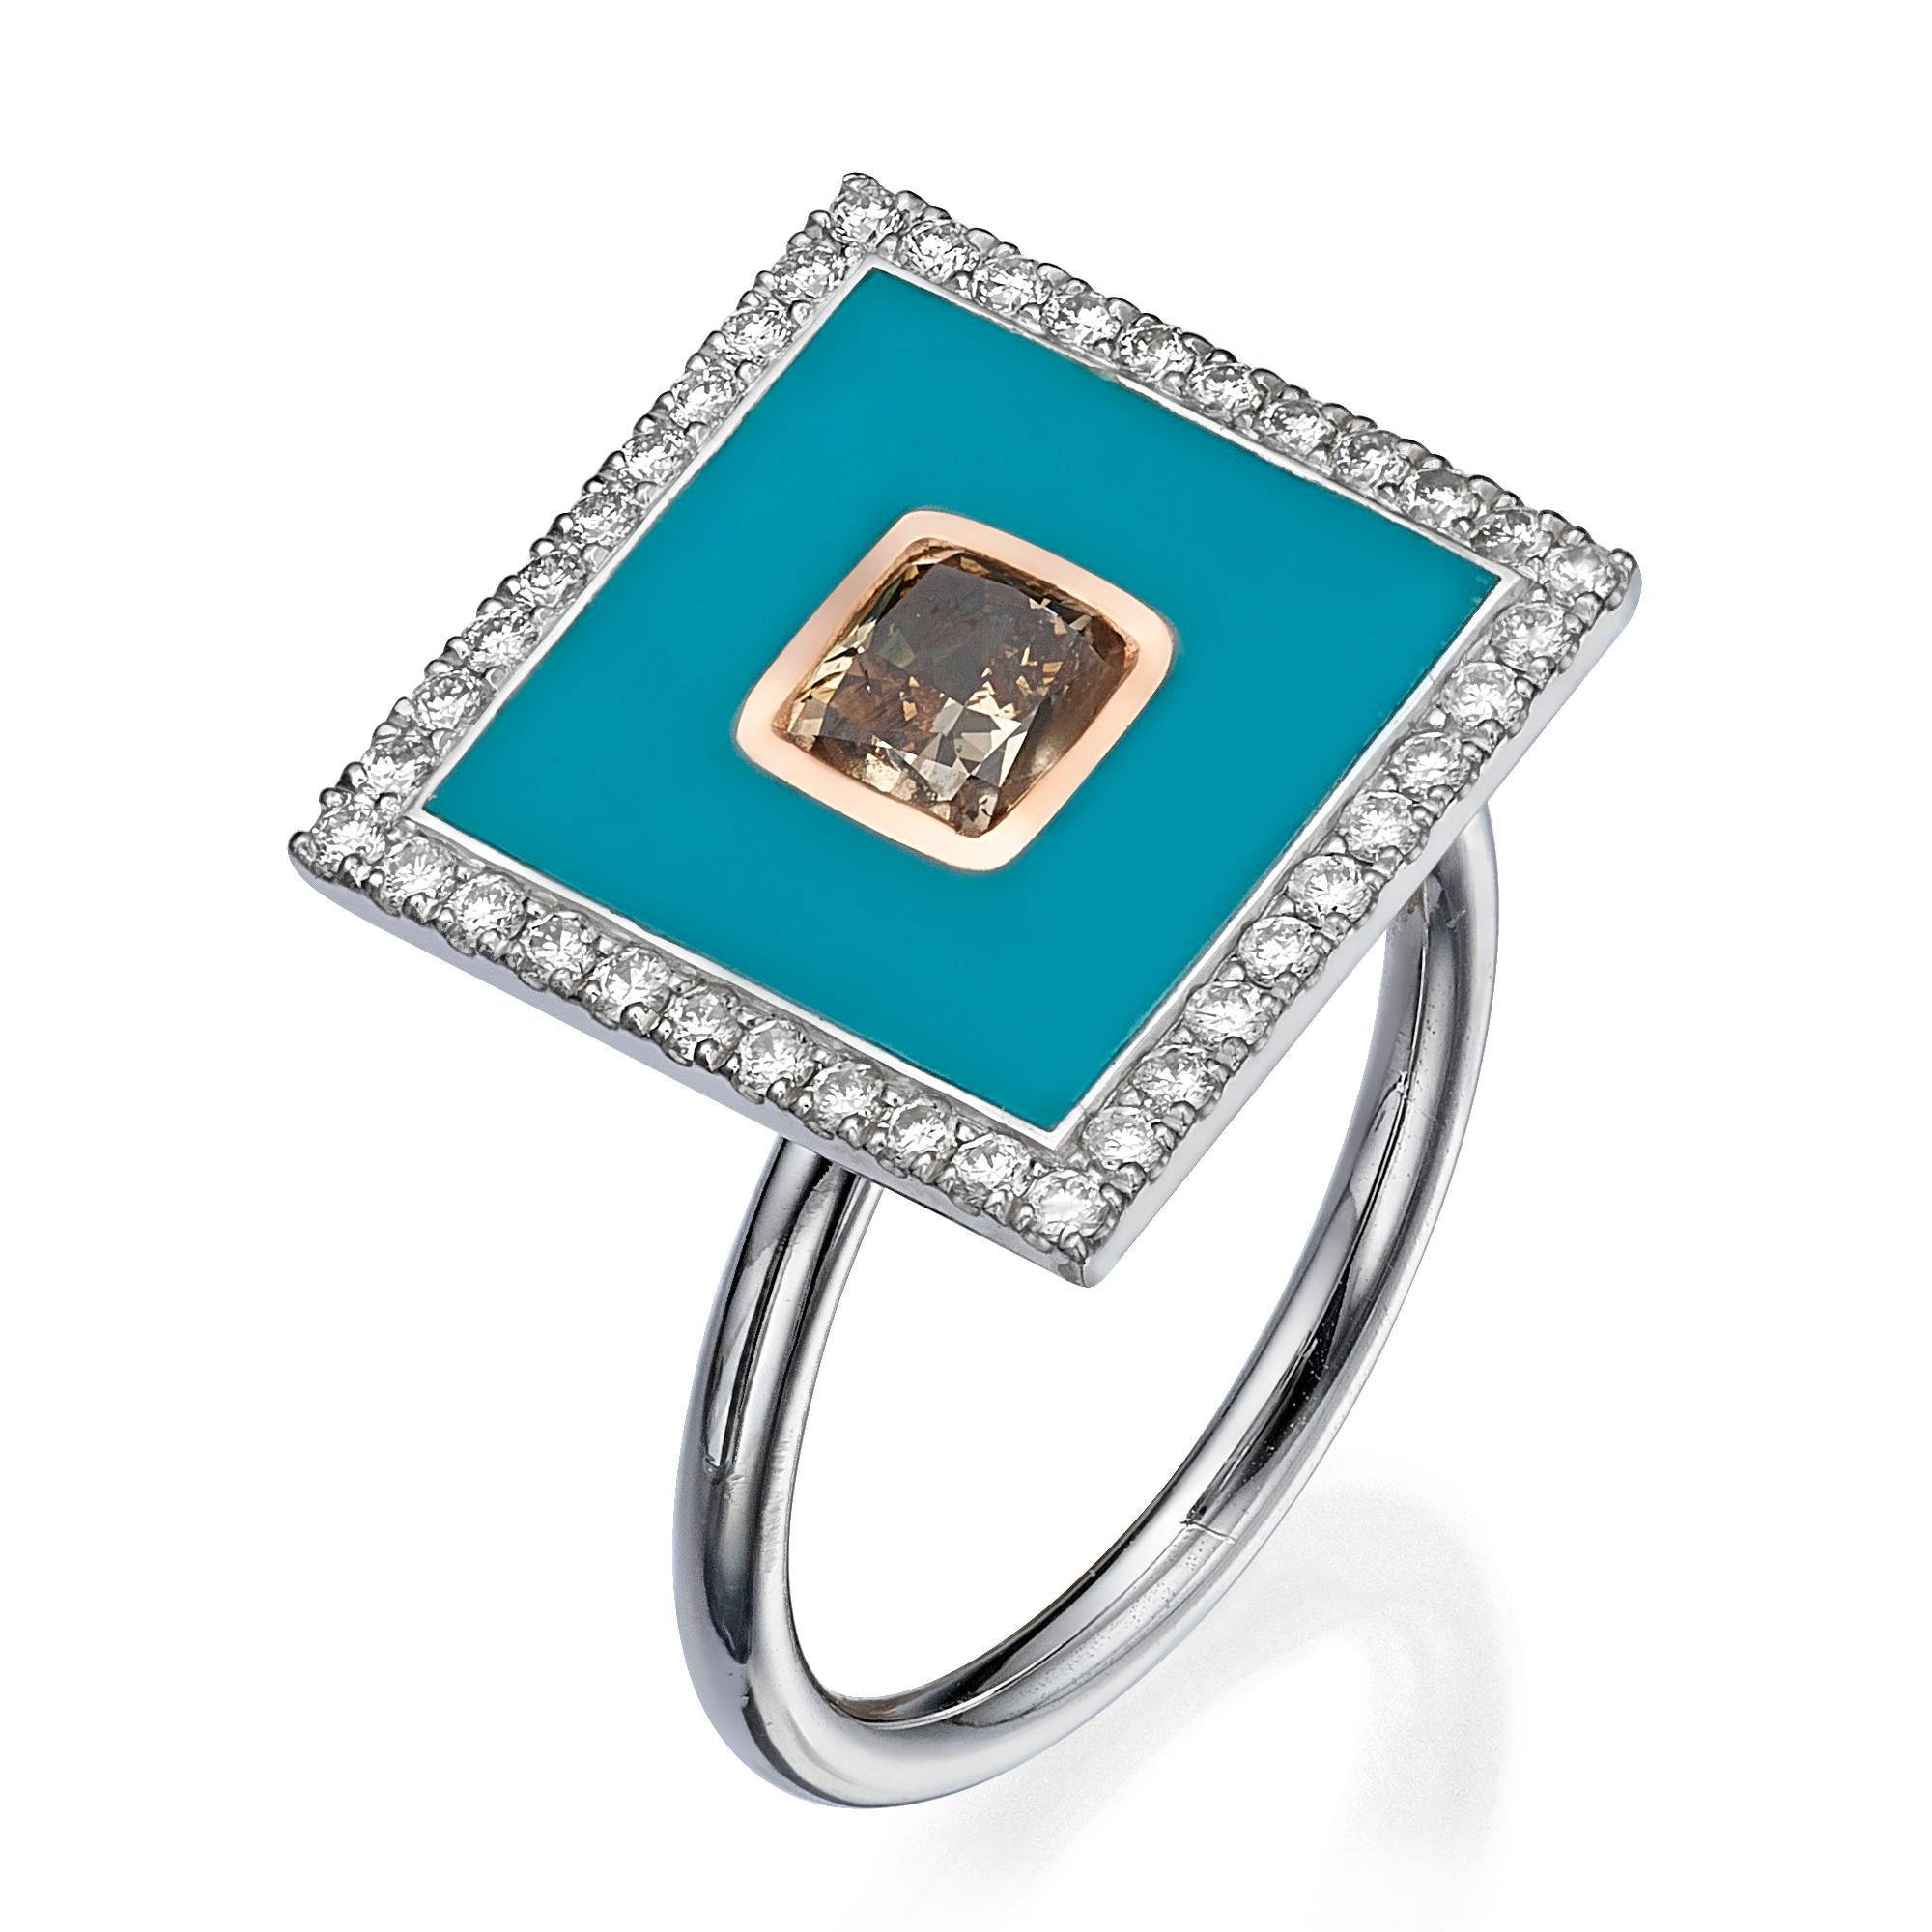 SKU# 4006126

Introducing a square-shaped 18k white and rose gold diamond ring with blue enamel, featuring a dazzling cushion-cut fancy orangy brown center stone framed by lustrous rose gold and white diamonds adorning the square-shaped frame. 

The